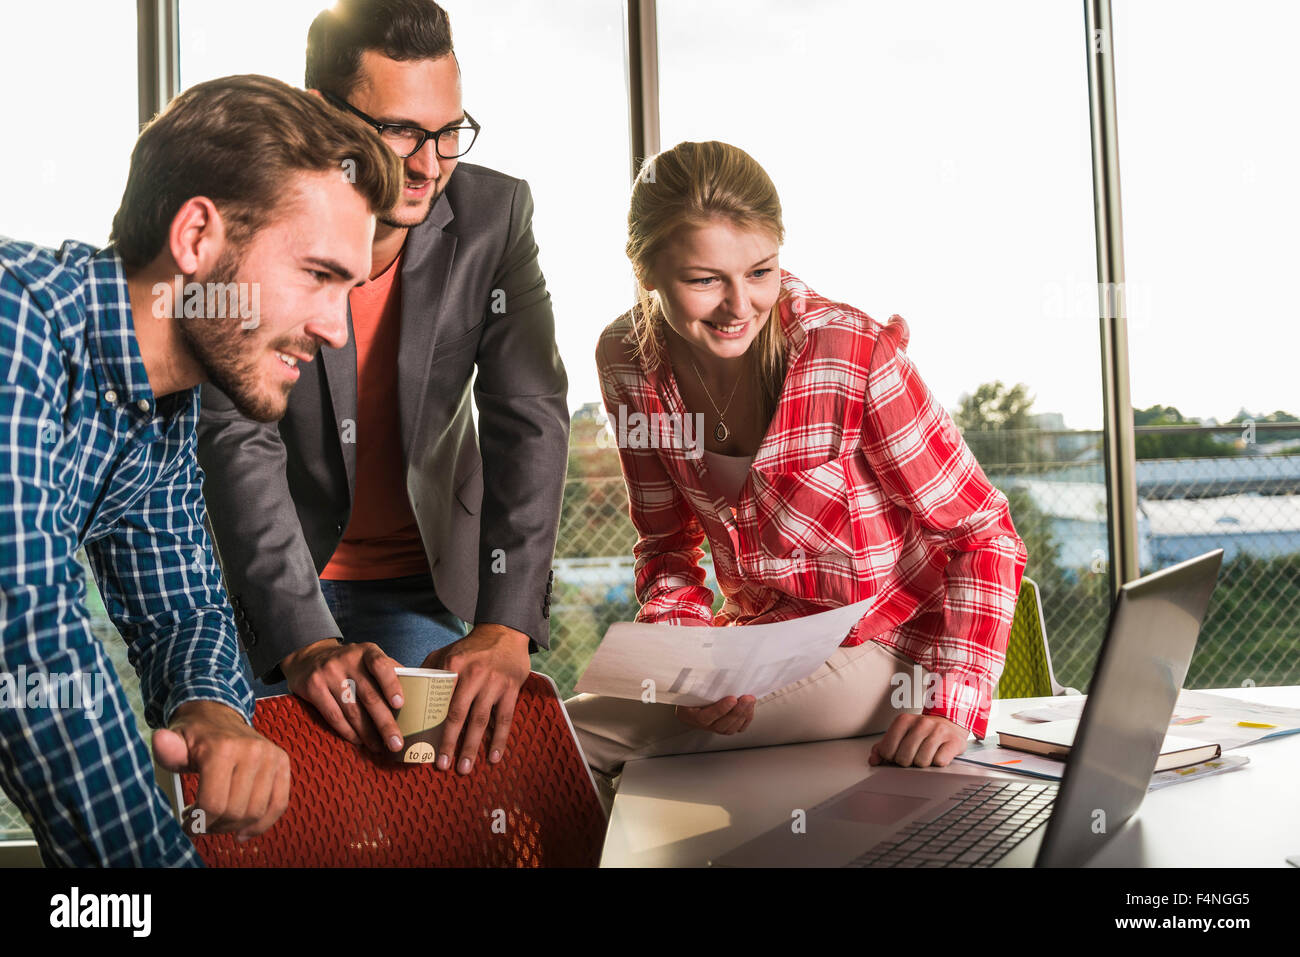 Three smiling young people in conference room looking at laptop Stock Photo